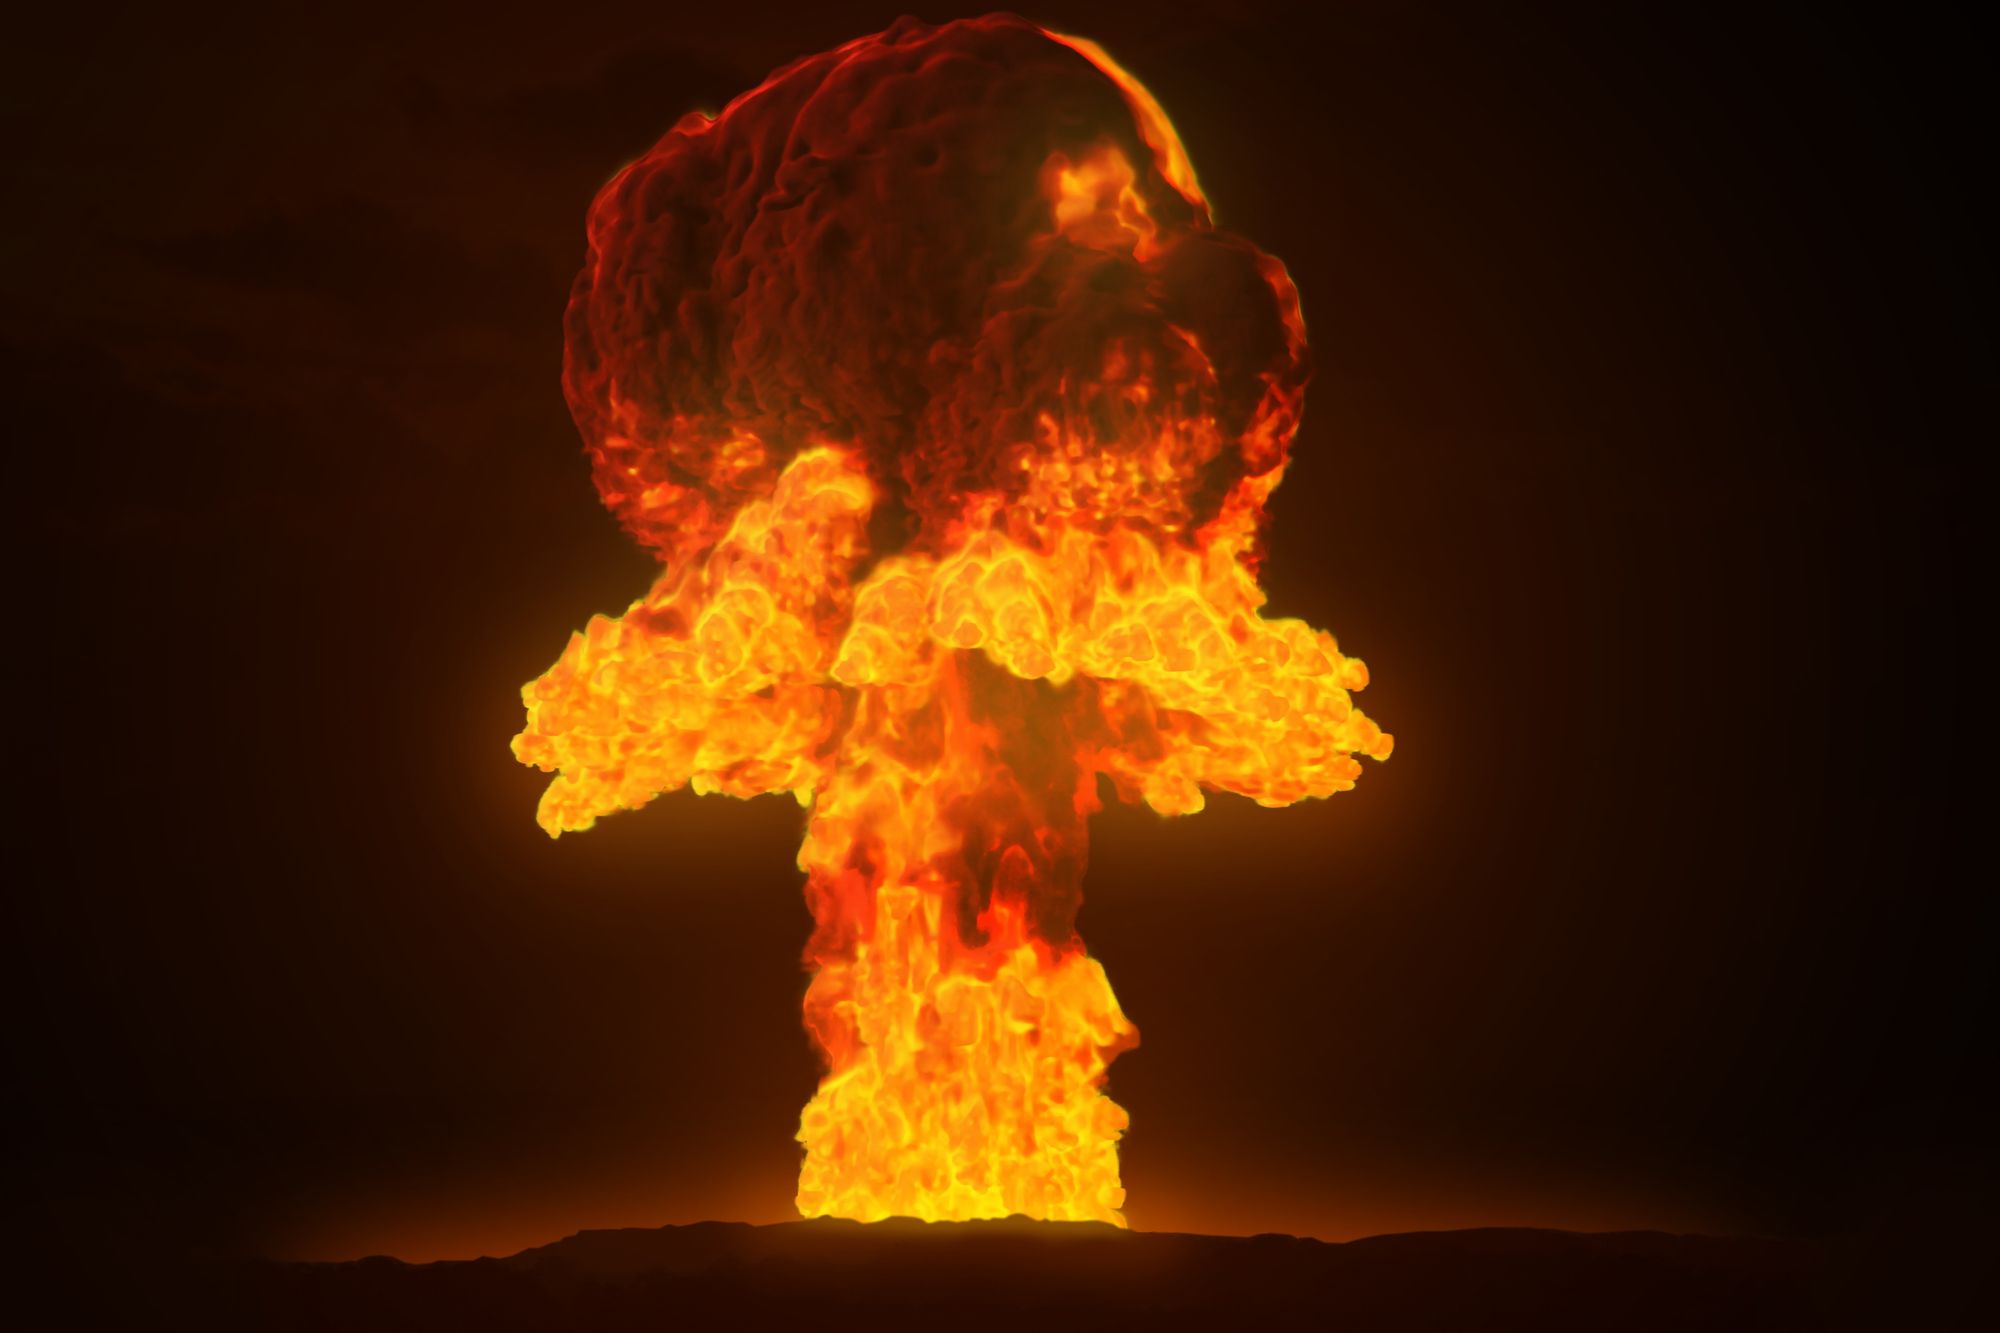 Report: Nuclear War Could Spark Global Famine